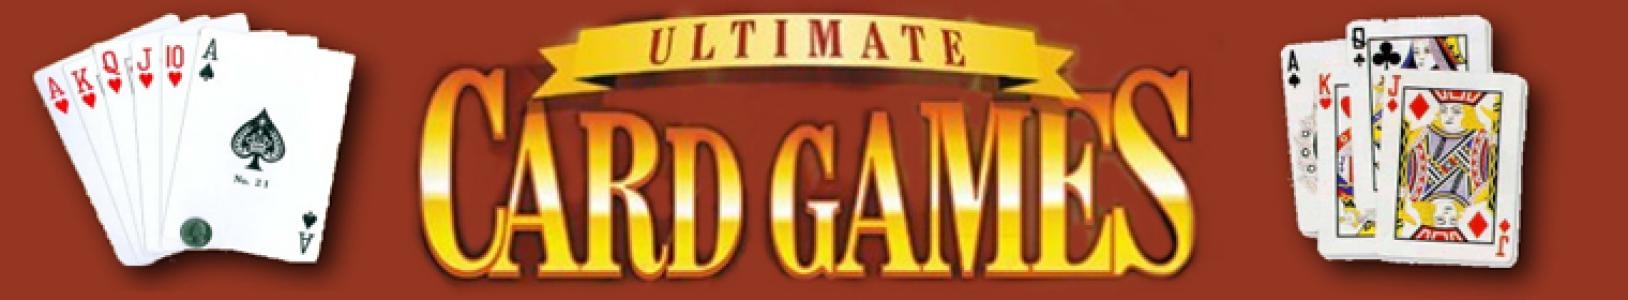 Ultimate Card Games banner